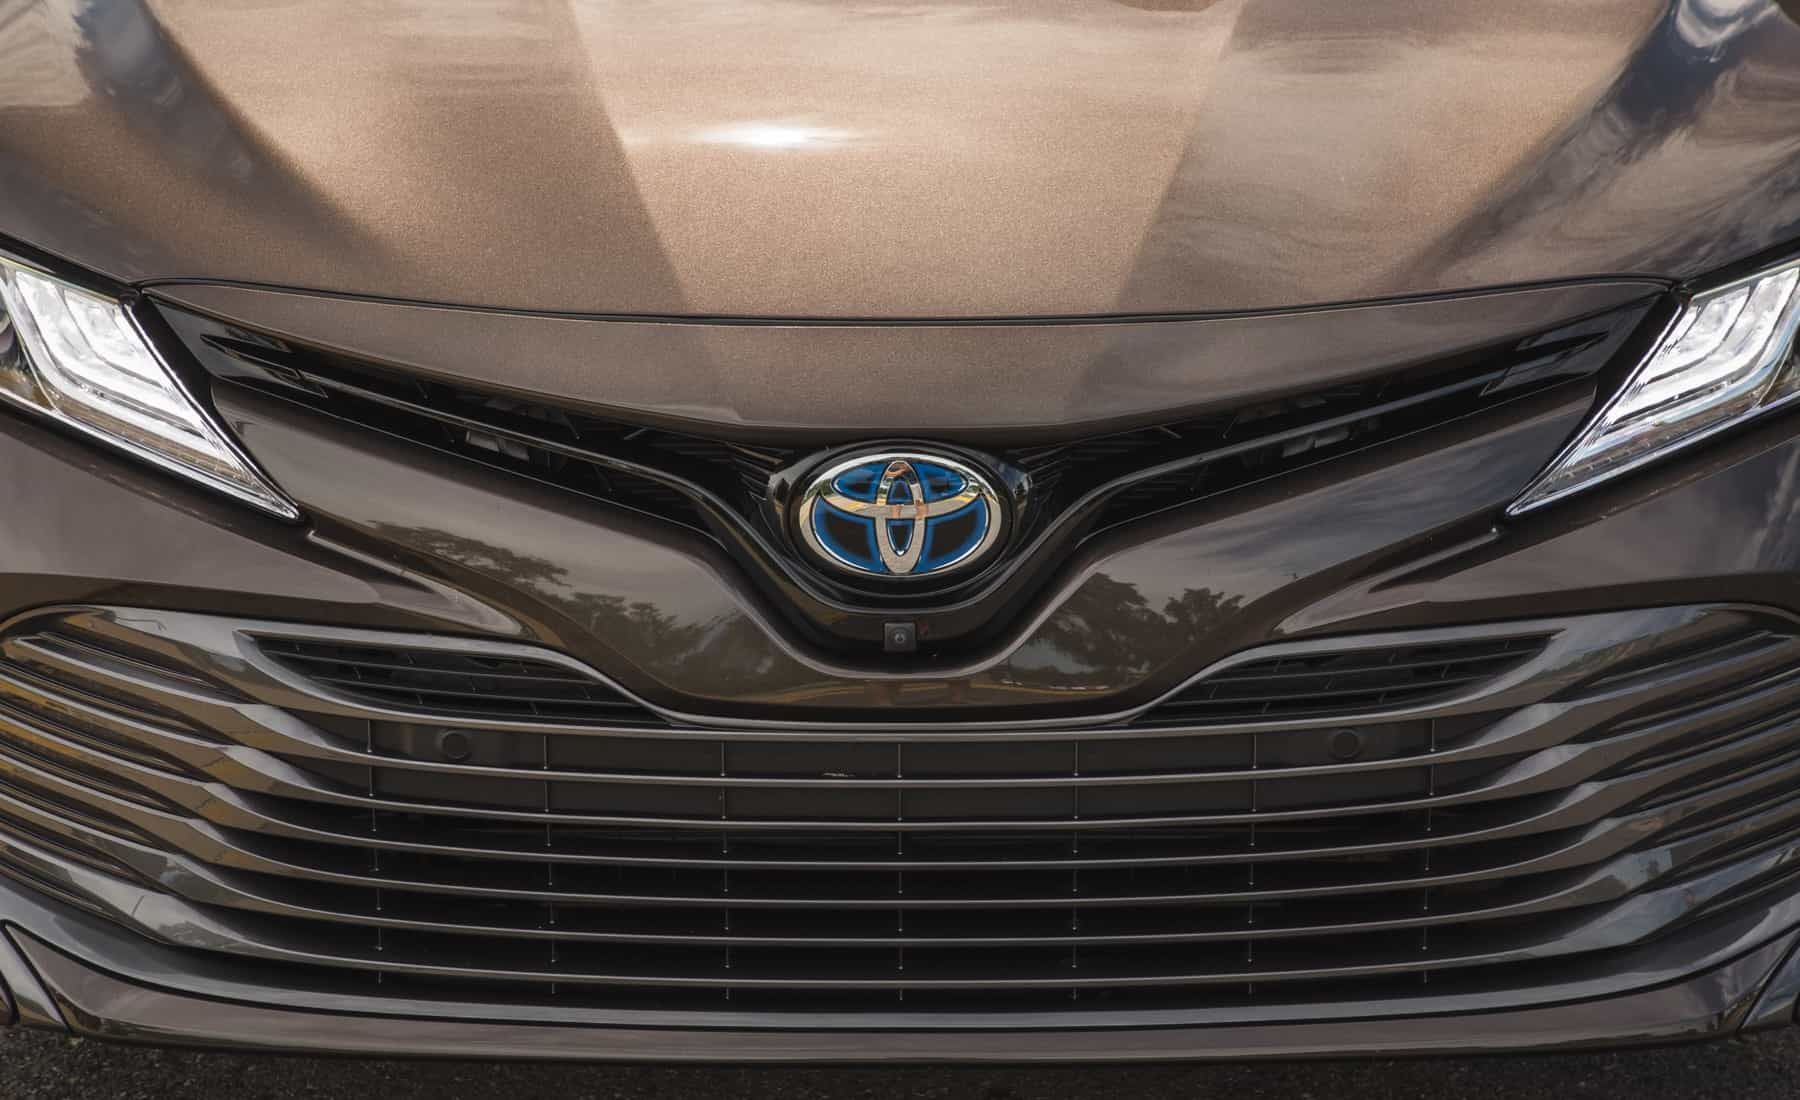 2018 Toyota Camry Hybrid XLE Exterior View Front Grille (View 41 of 41)